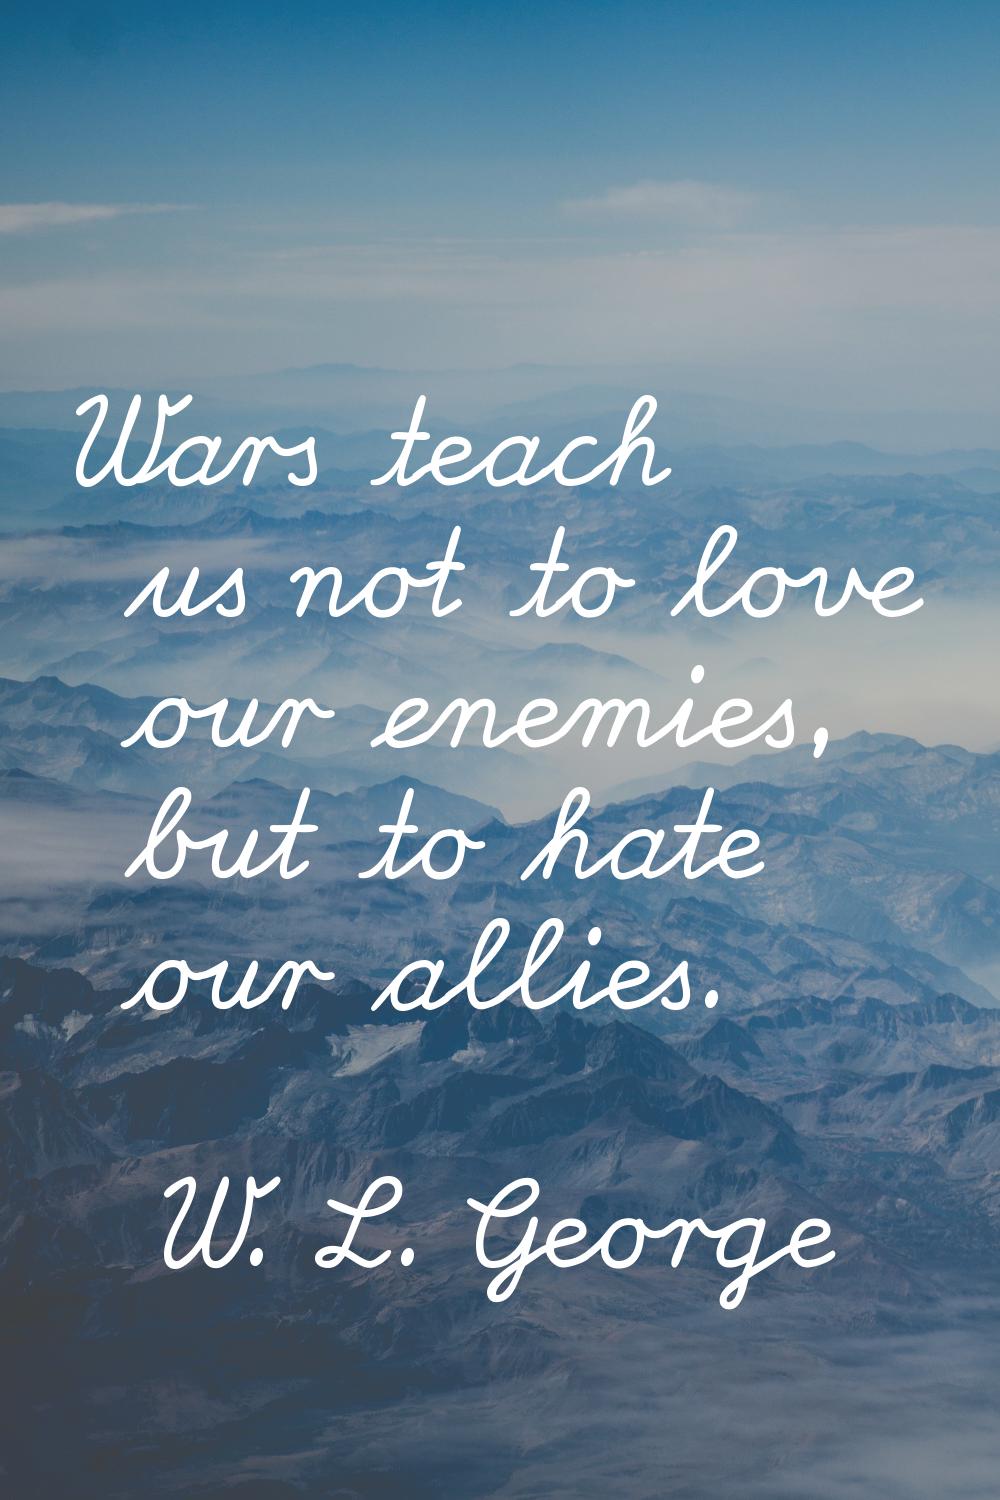 Wars teach us not to love our enemies, but to hate our allies.